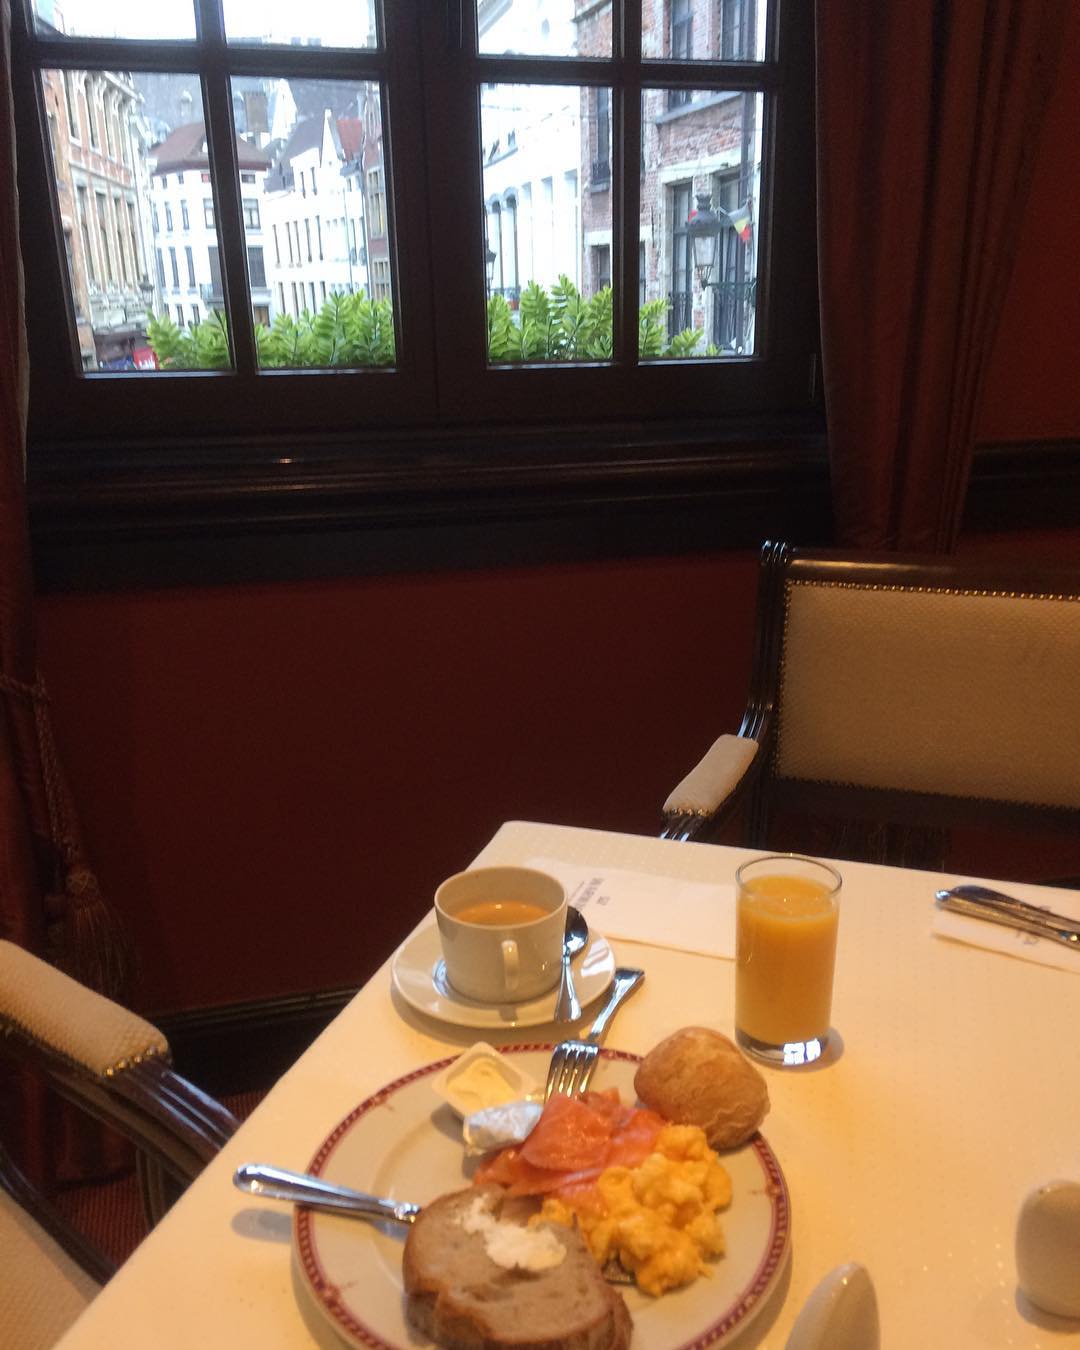 Bonjour. Breakfast with a view.